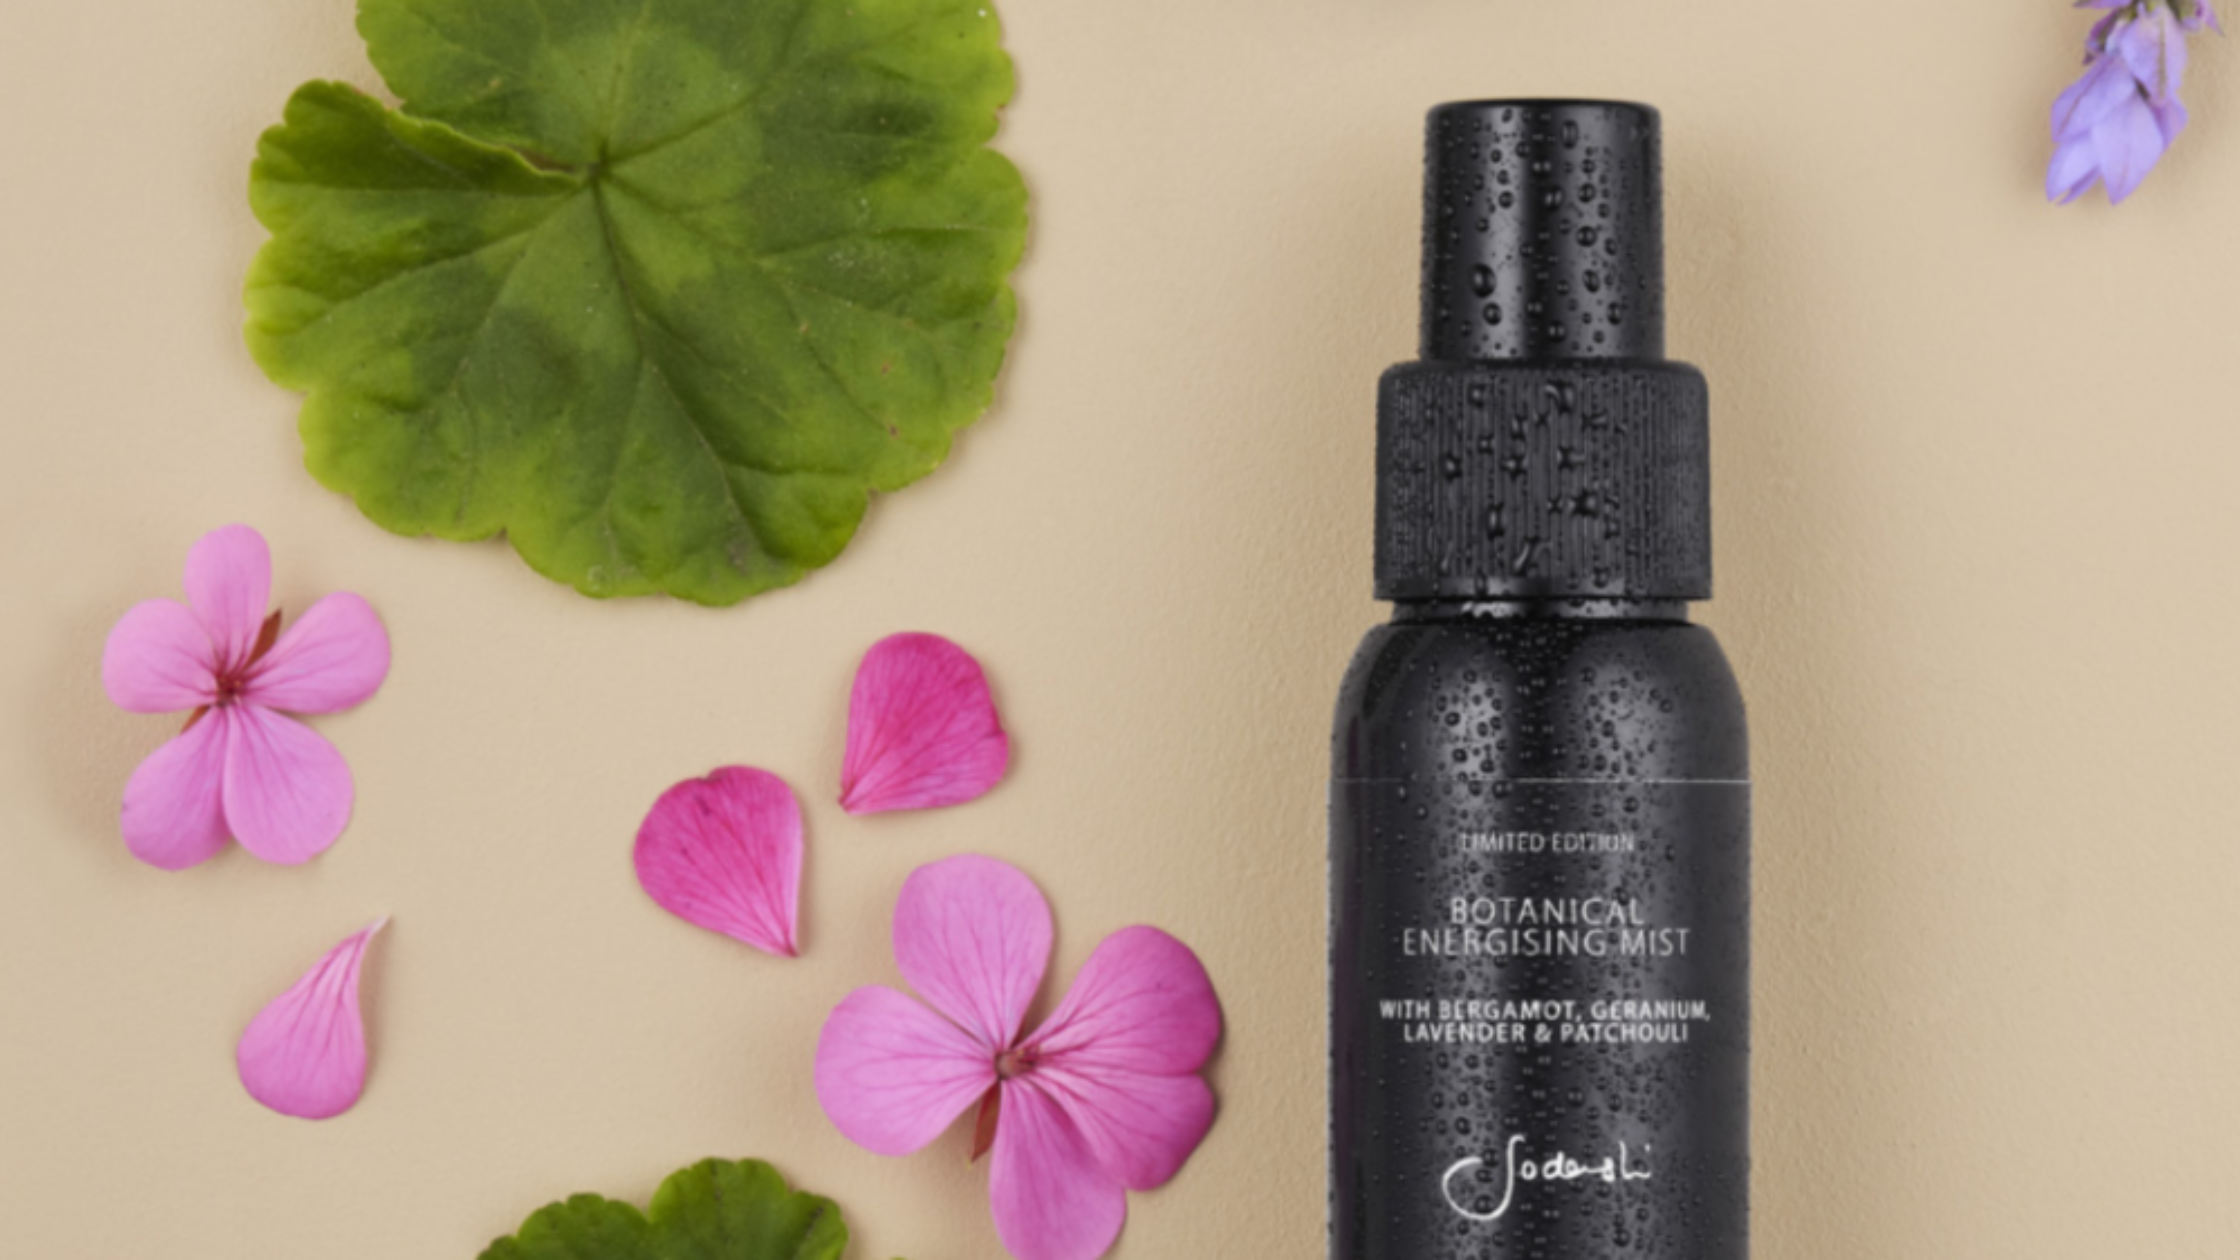 Introducing our Limited Edition Botanical Energising Mist